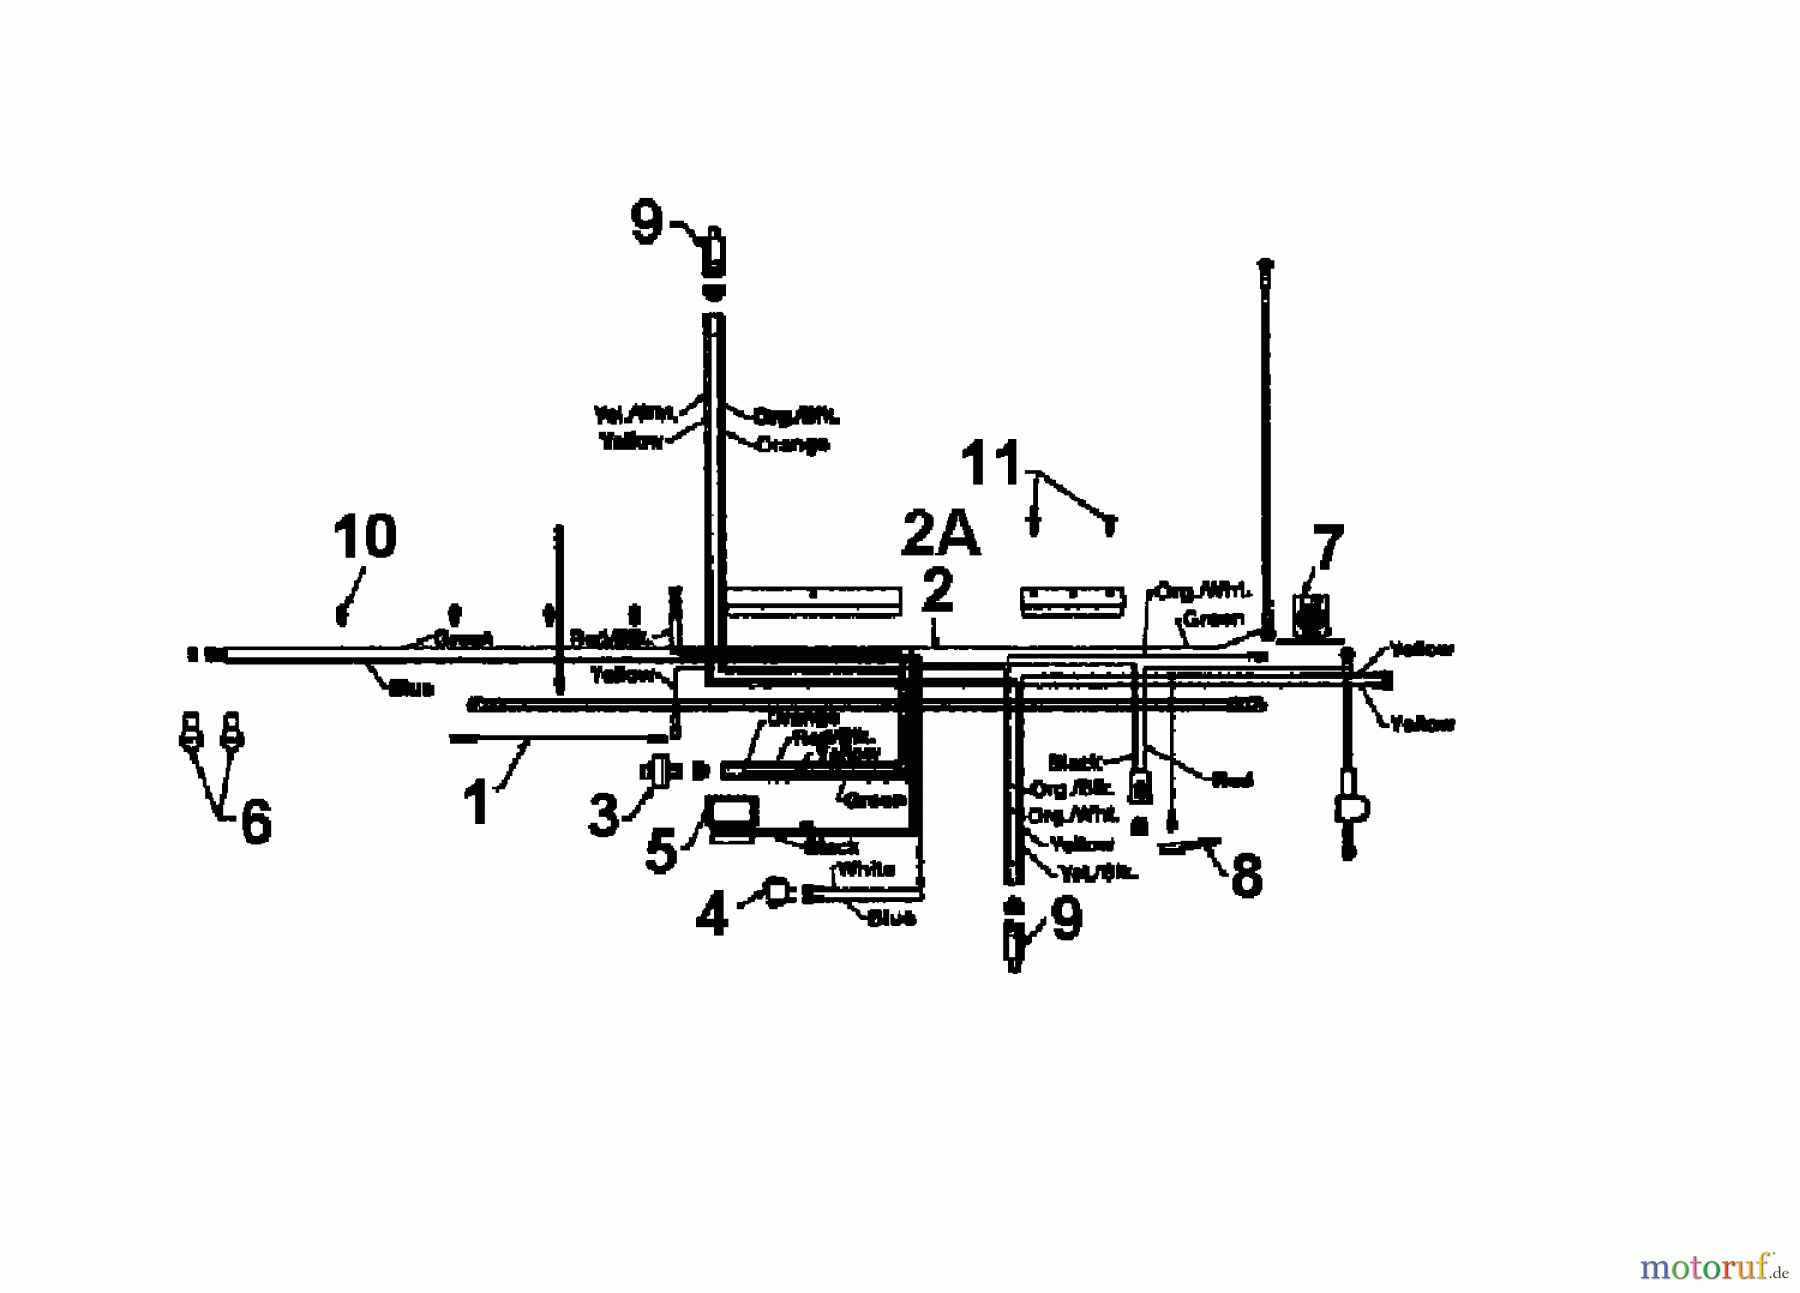  Lawnflite Lawn tractors 806 13AO695G611  (1997) Wiring diagram single cylinder